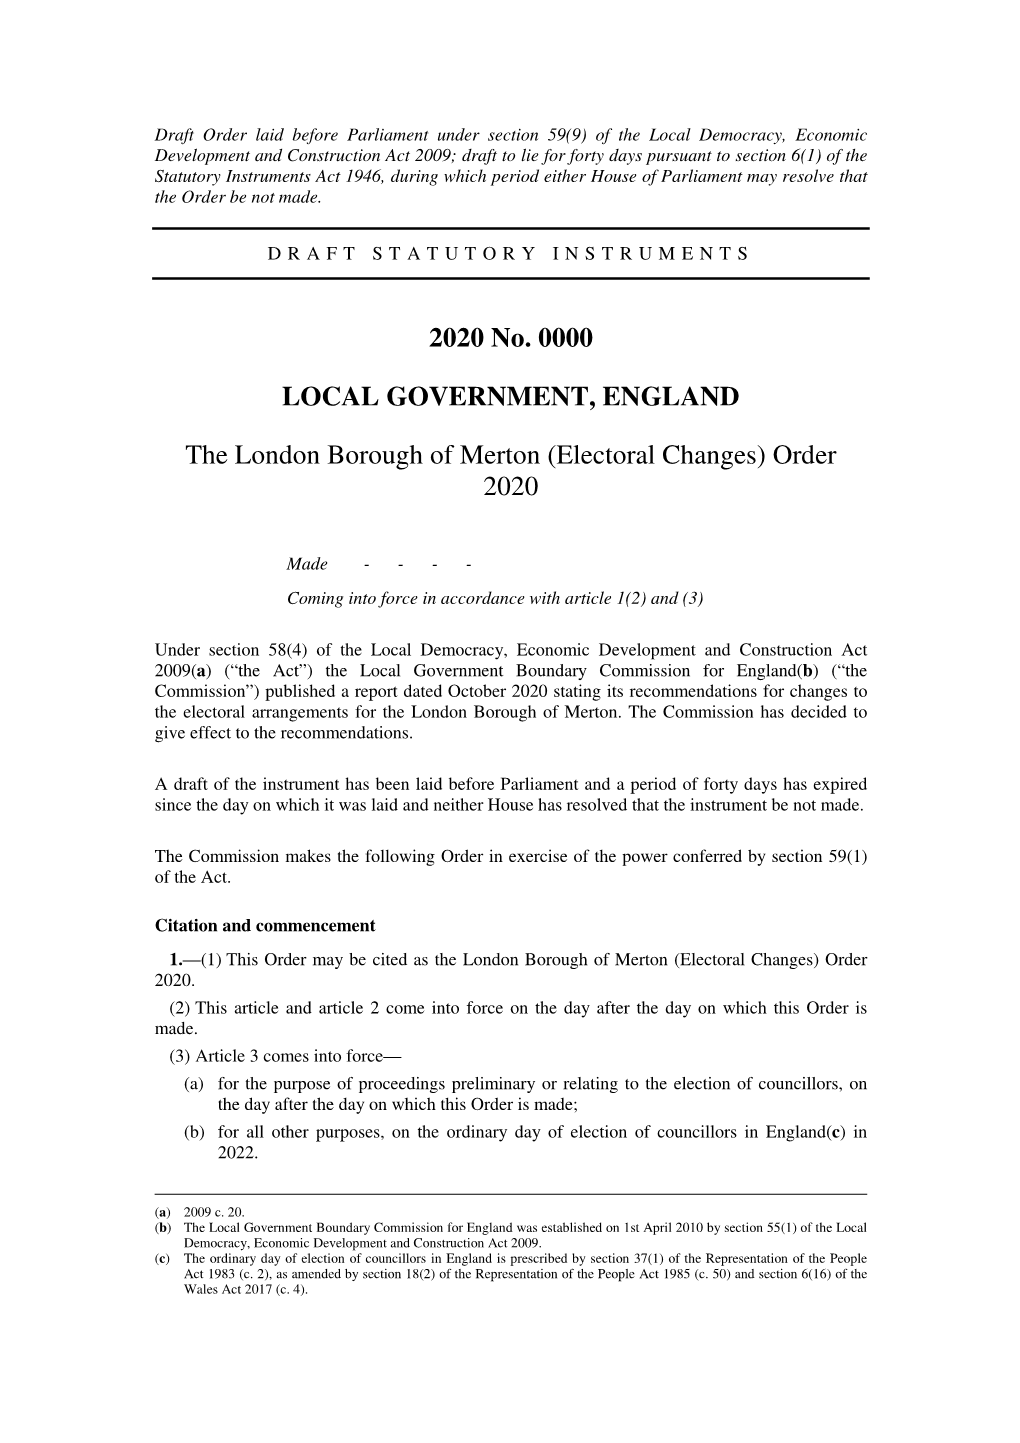 The London Borough of Merton (Electoral Changes) Order 2020